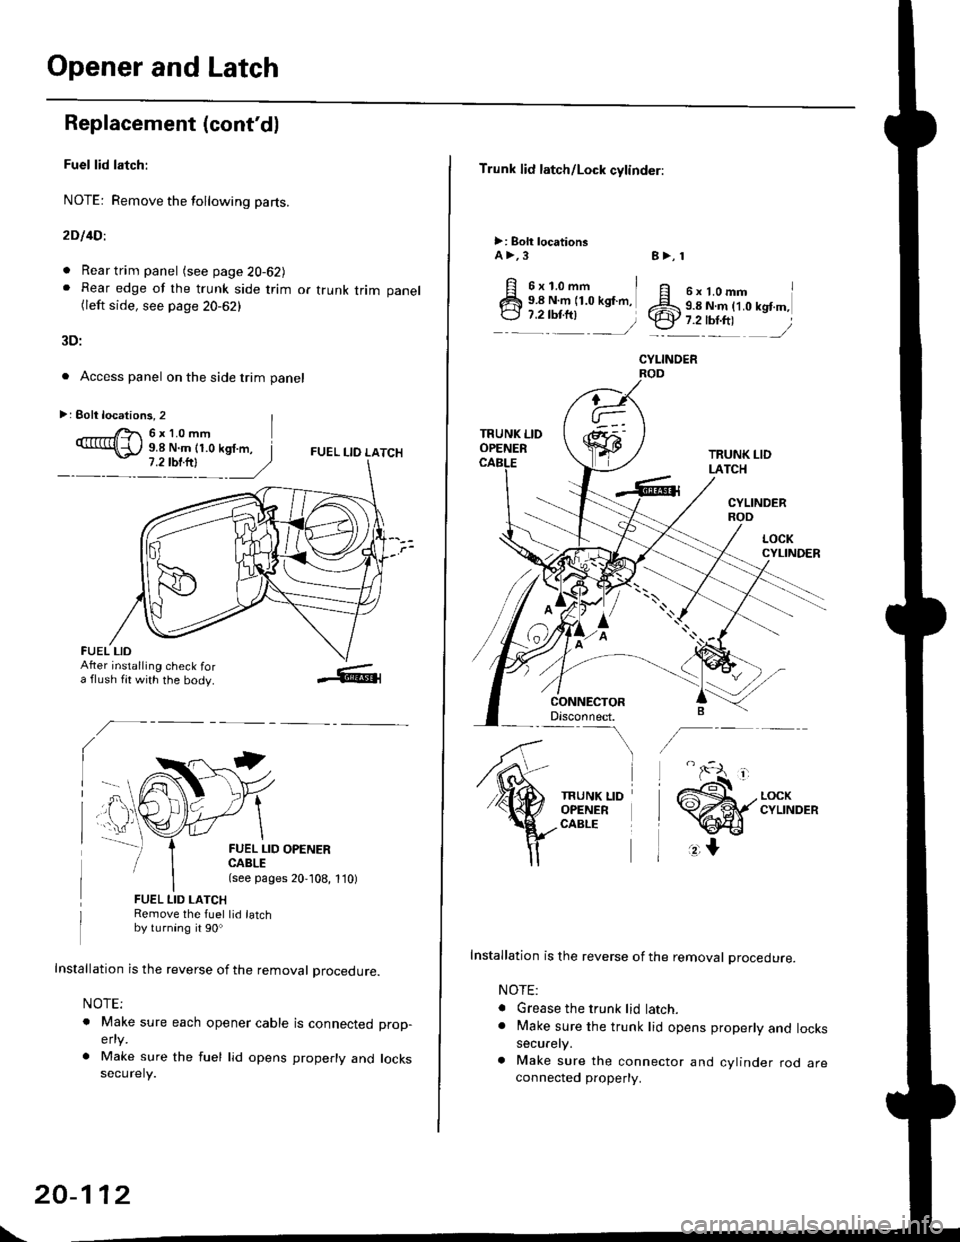 HONDA CIVIC 1997 6.G Workshop Manual Opener and Latch
Replacement (contd)
Fuel lid latch:
NOTE: Remove the following pa(s.
2D l4Dl
. Rear trim panel (see page 20-62J. Rear edge of the trunk side trim or trunk trim panel(left side, see p